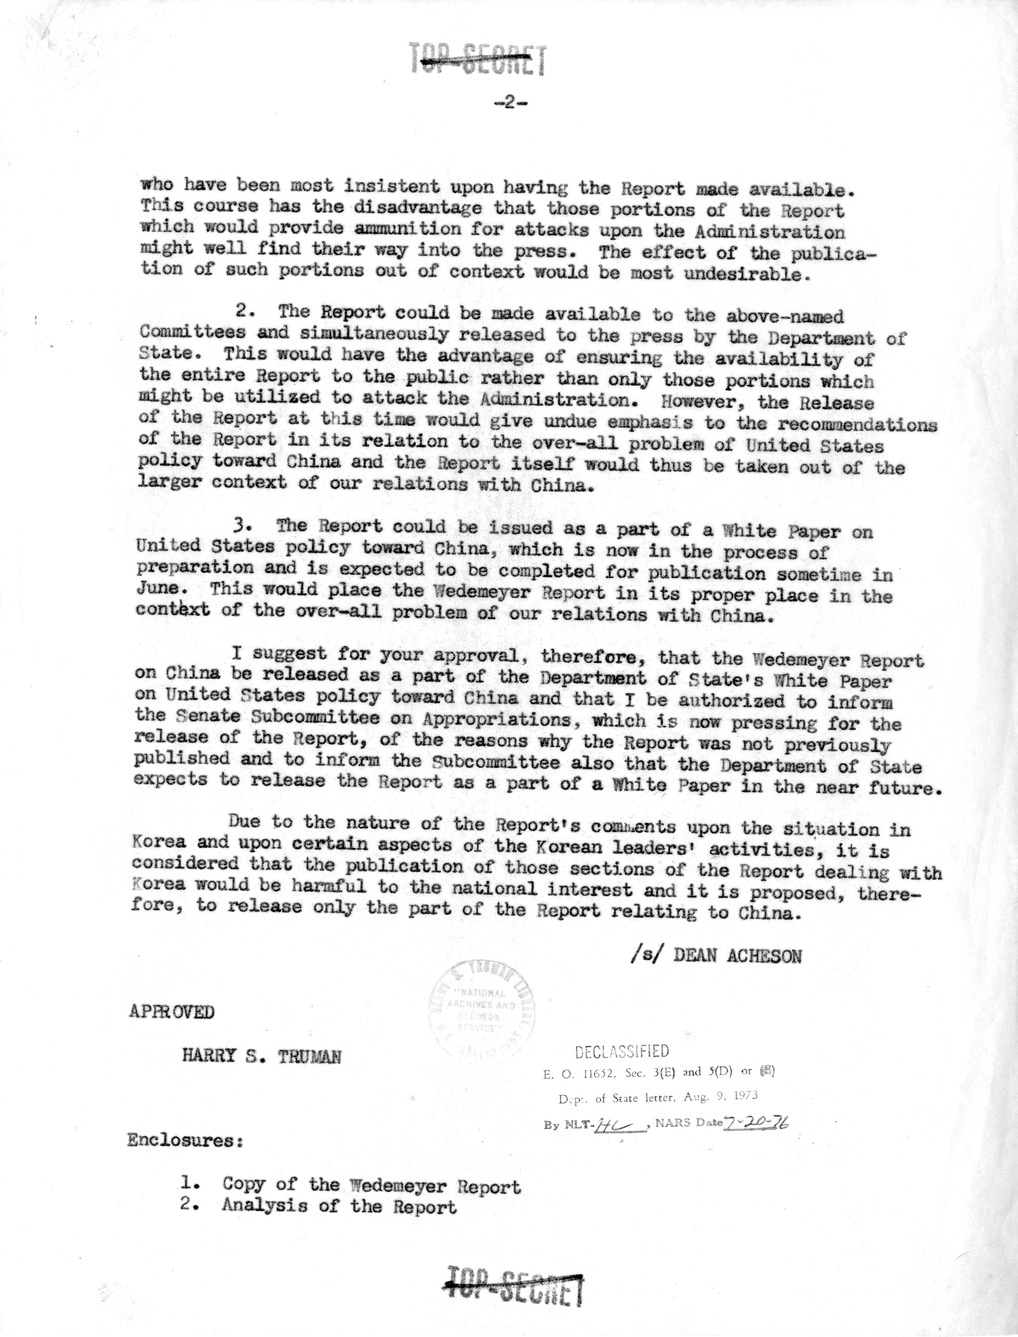 Memorandum from Clark Clifford to Secretary of State Dean Acheson, with Attachment